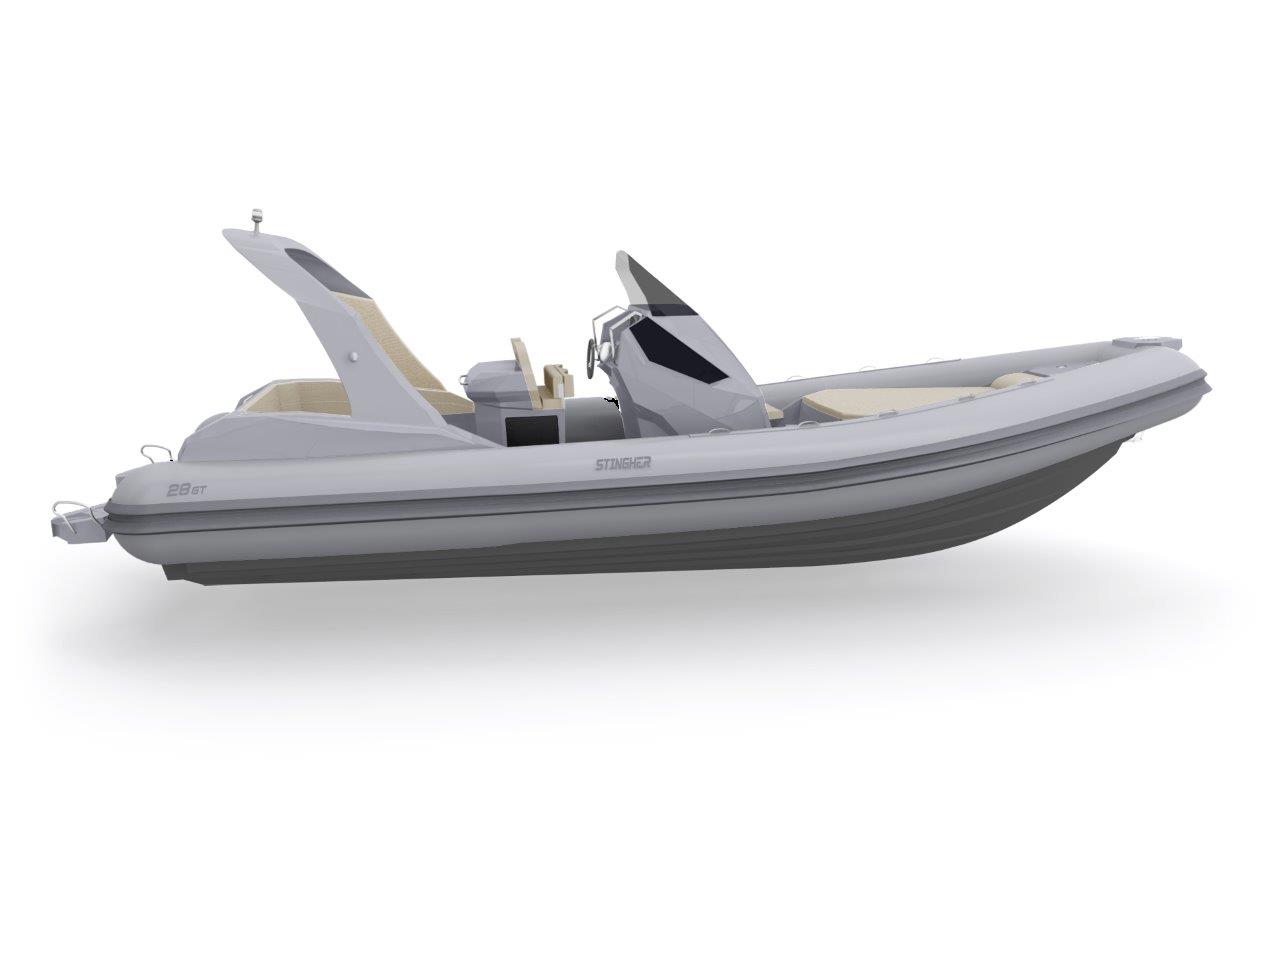 Italboats STINGHER 28 GT (2021)